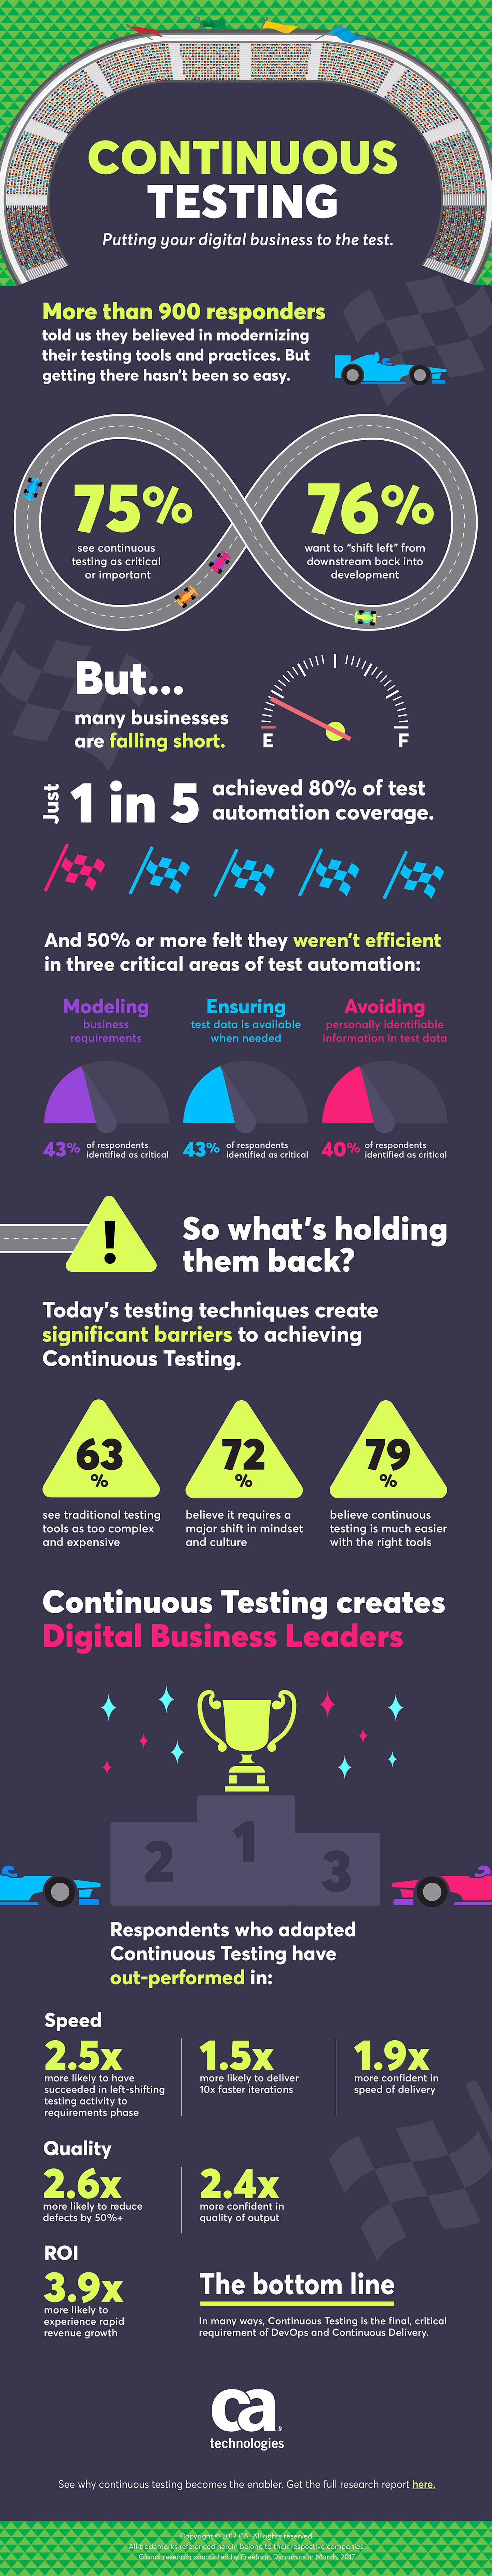 Continuous testing: putting your digital business to the test